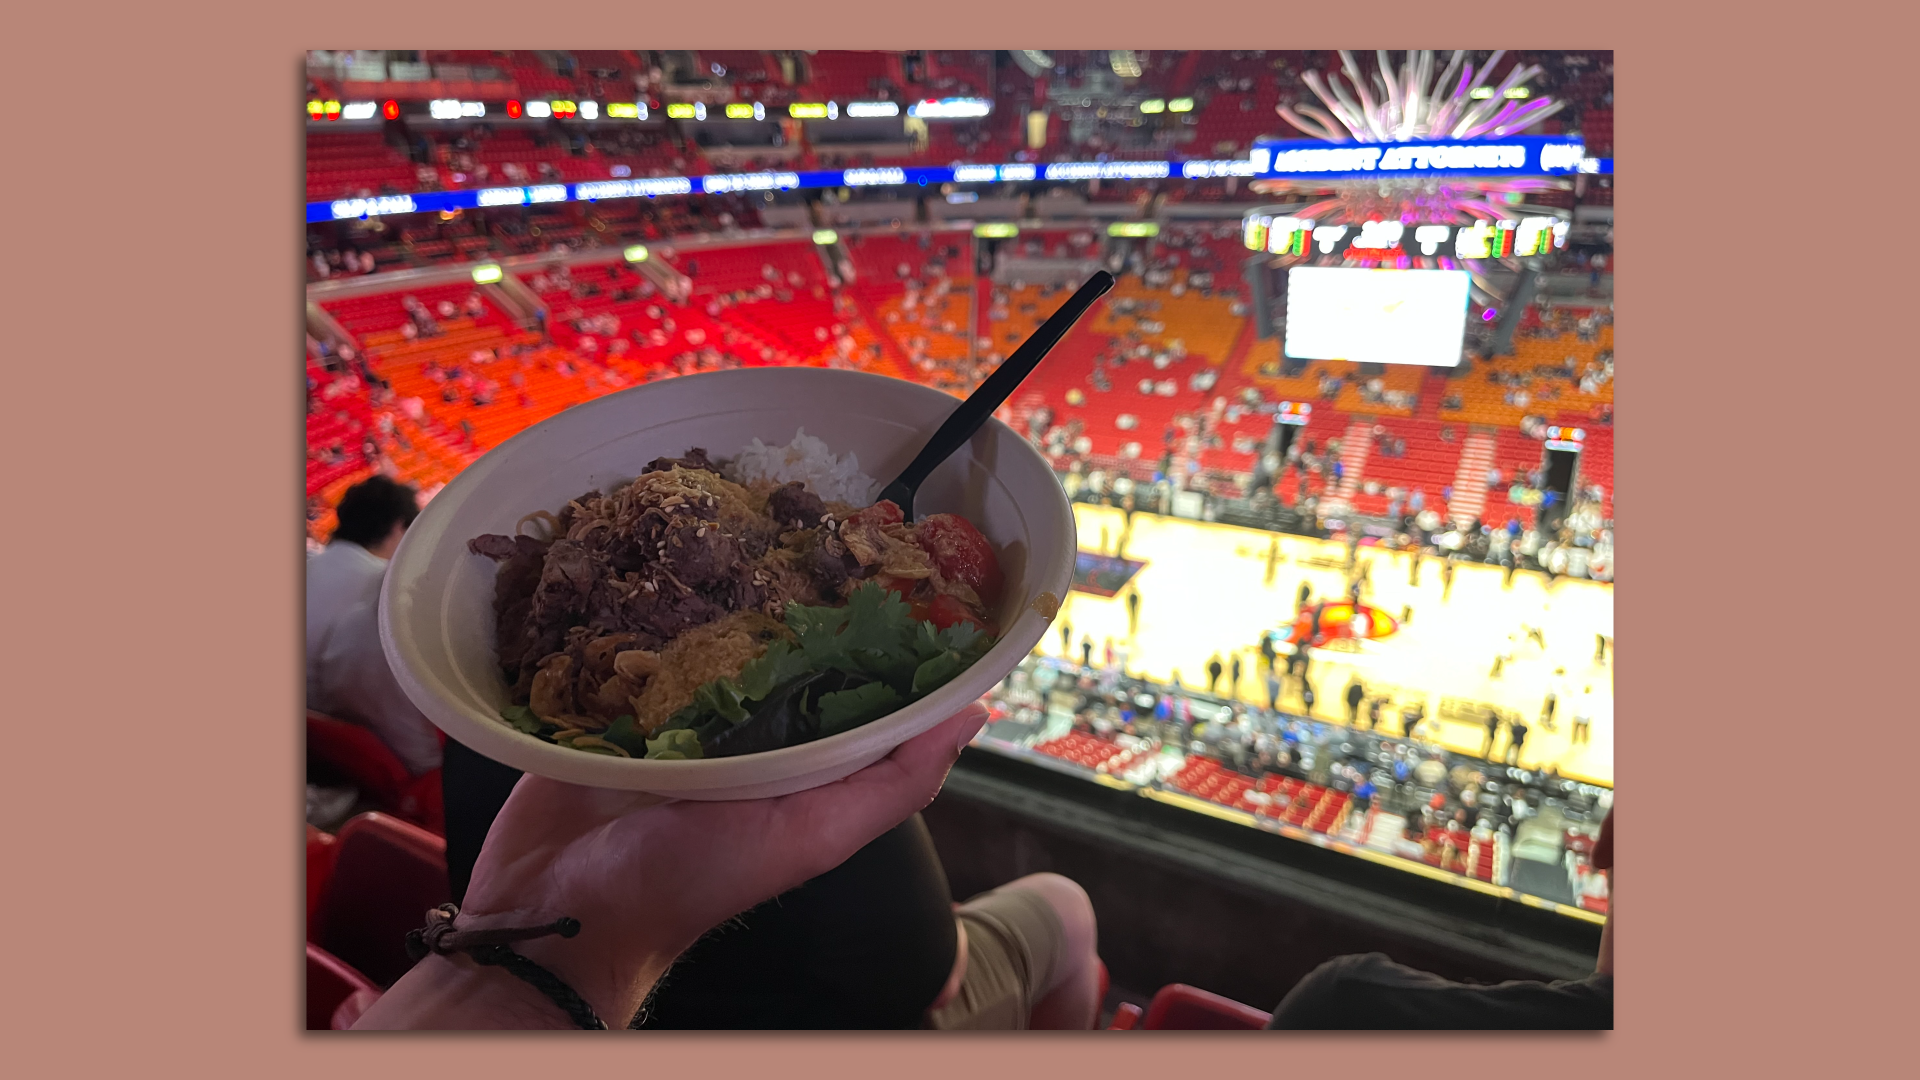 A steak bowl from Phuc Yea is pictured at the Heat game.